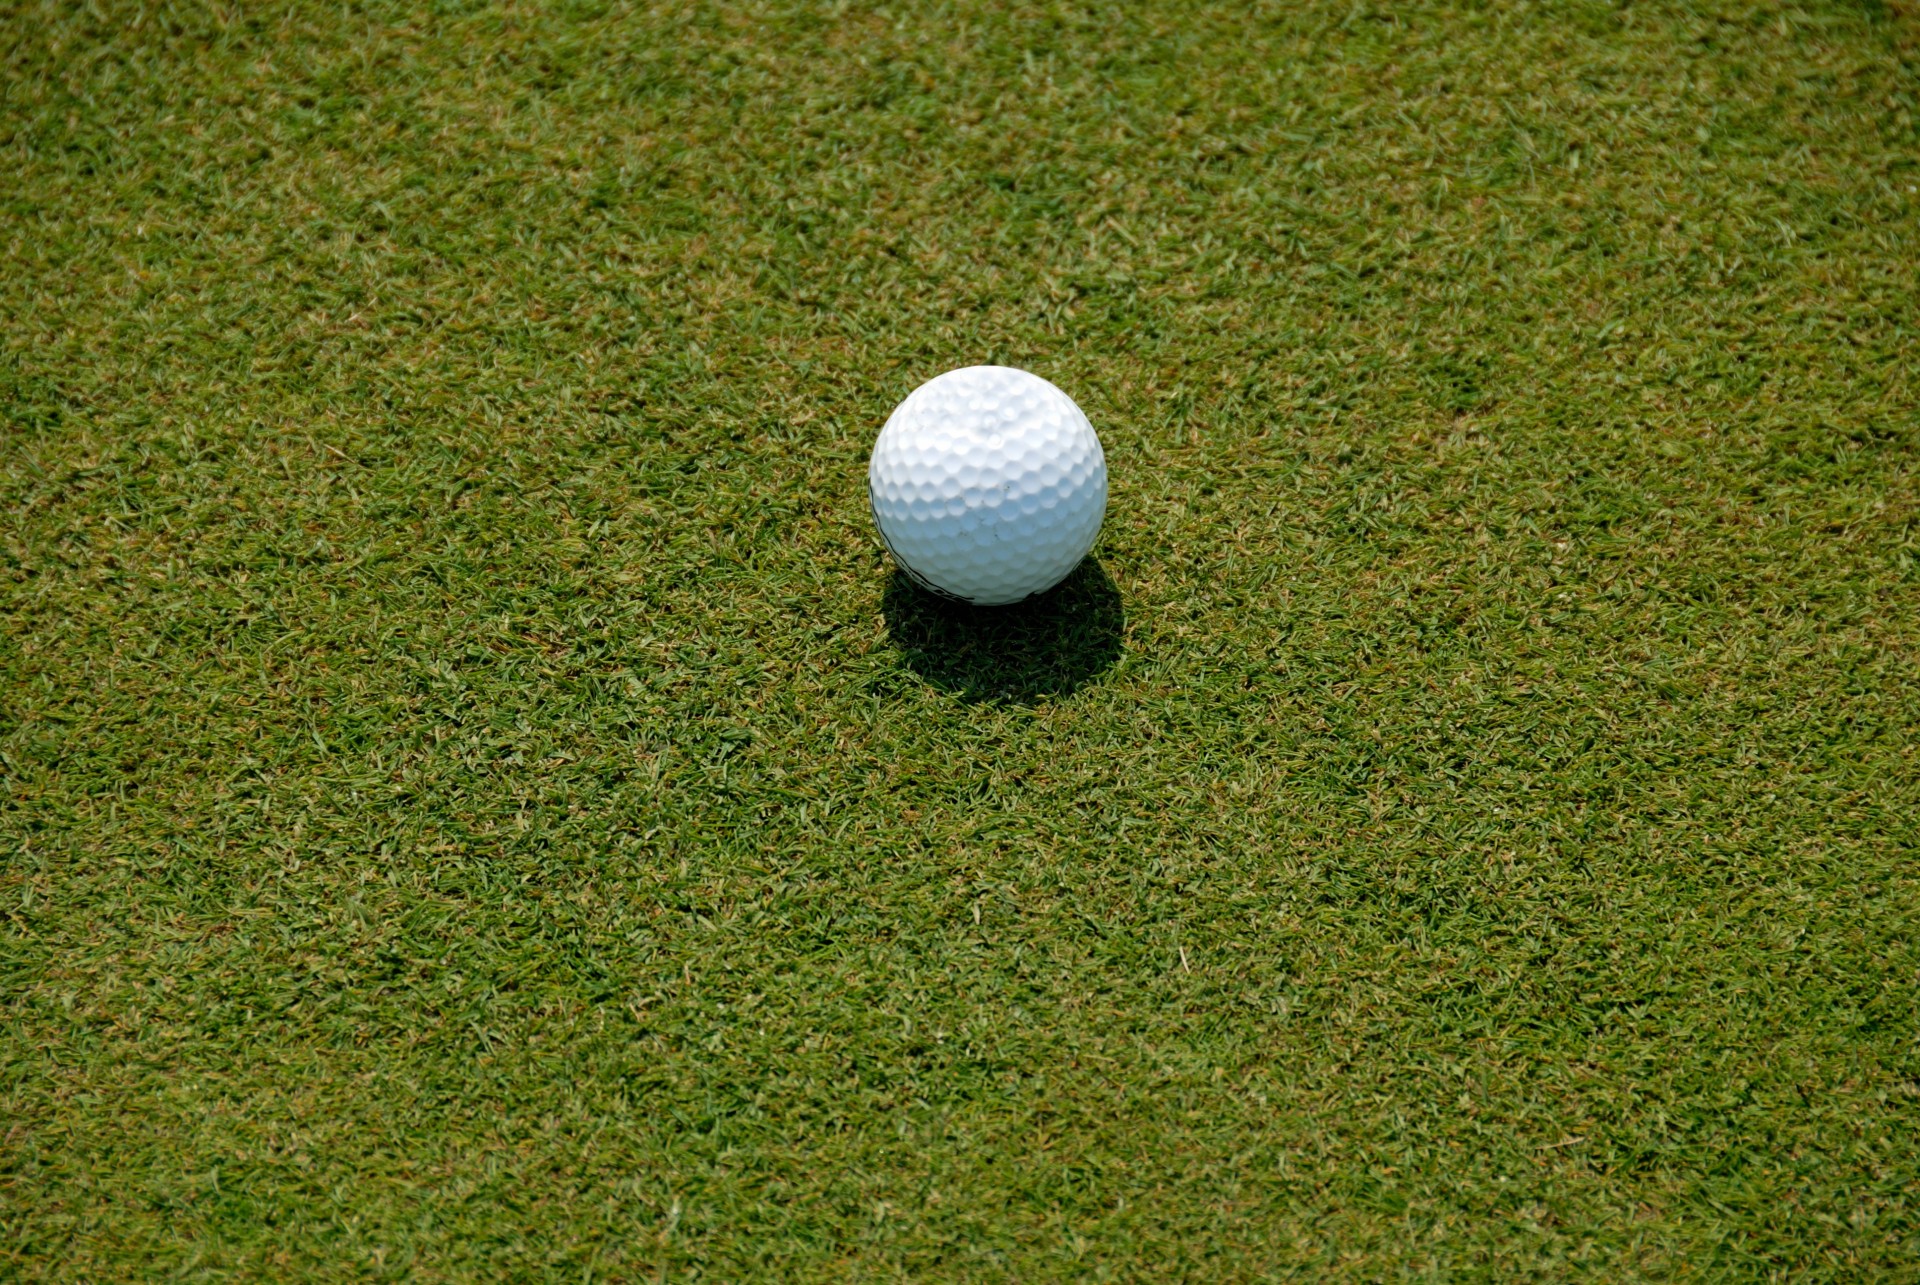 Golf Ball on practice putting green